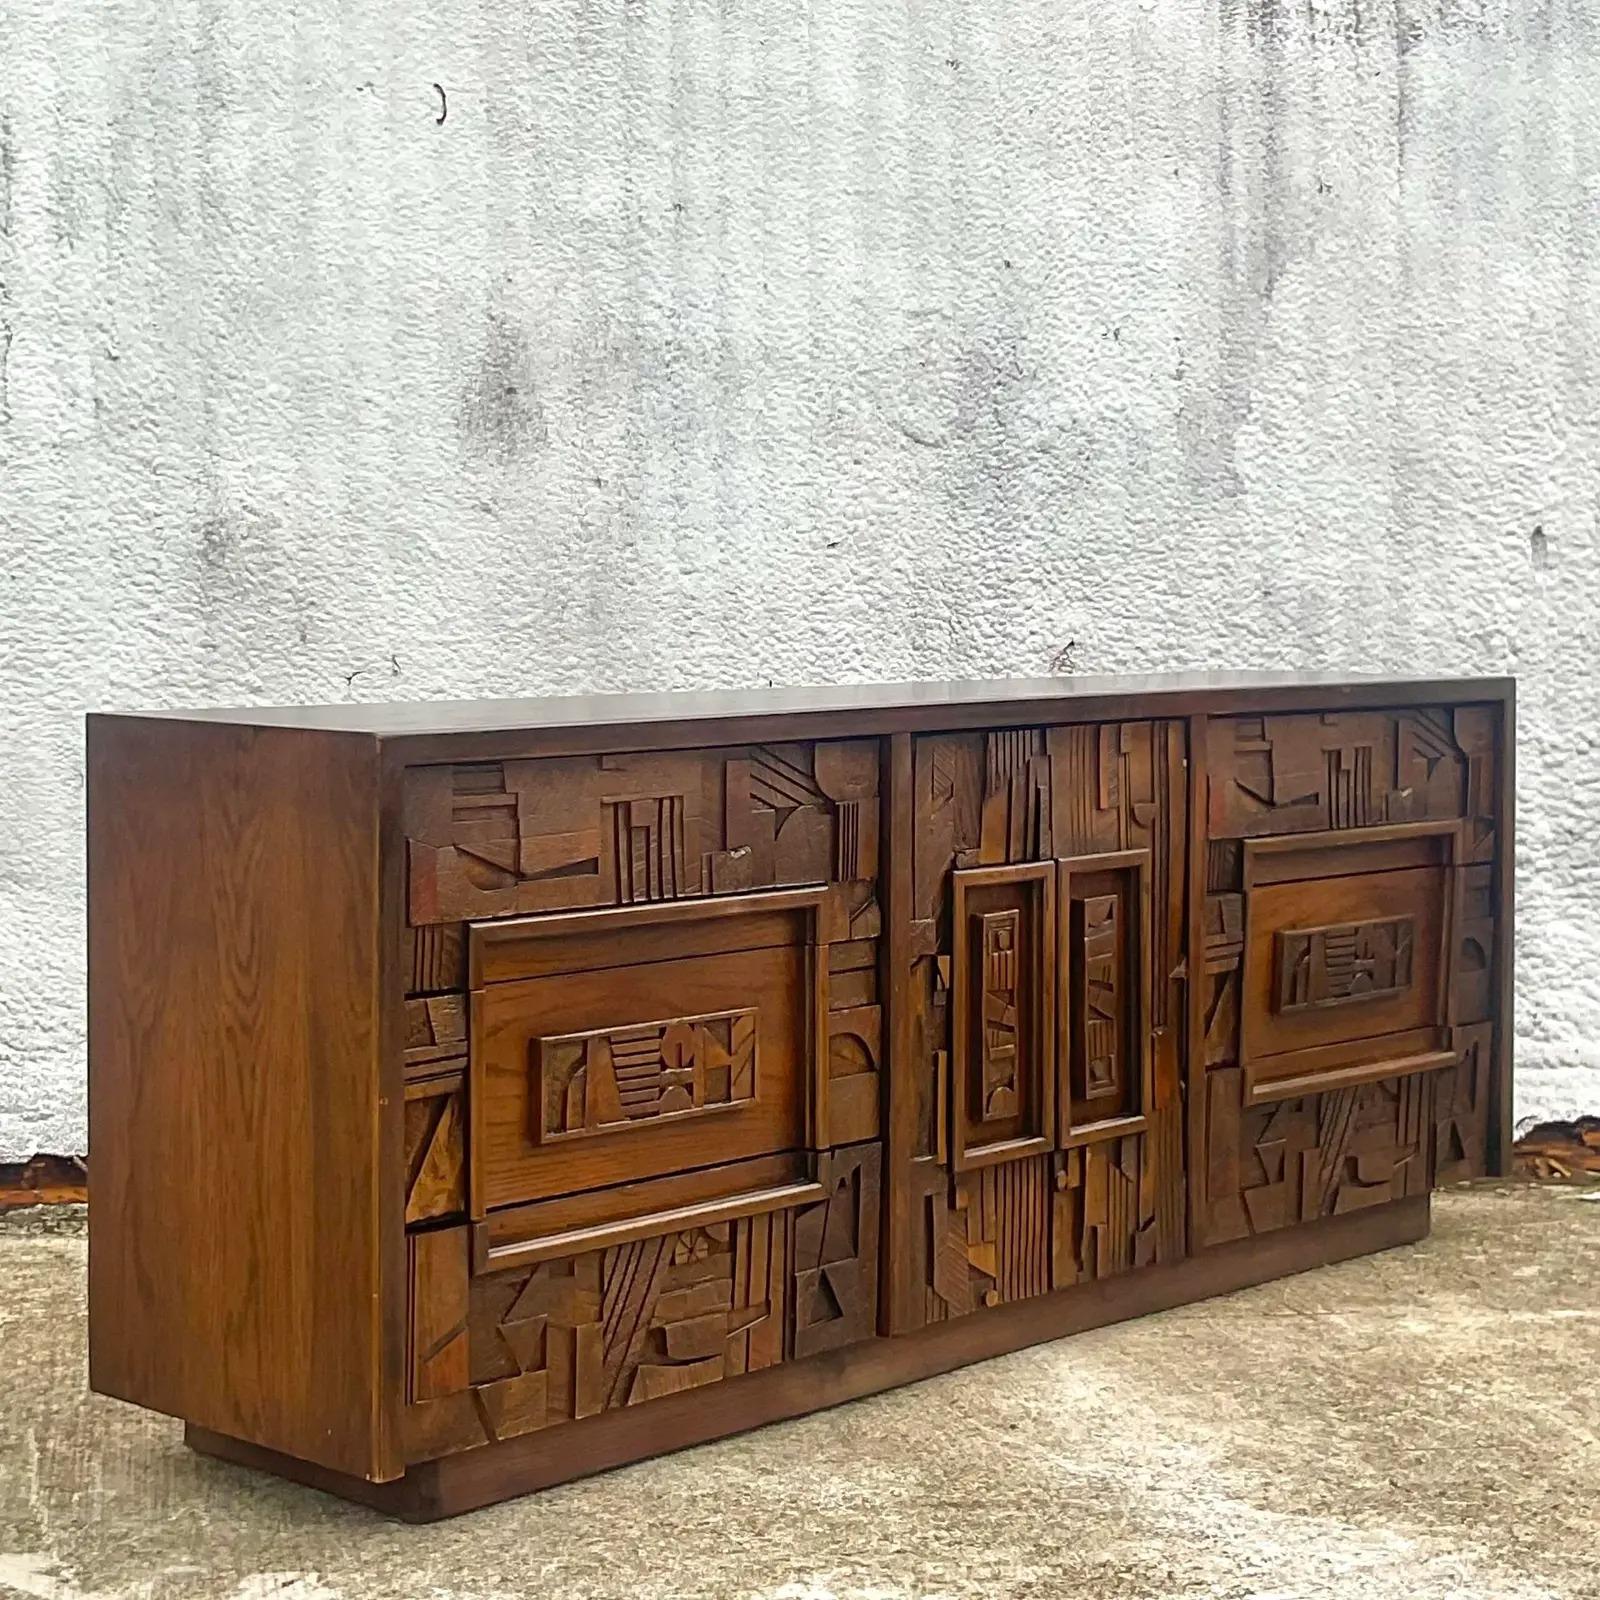 Fantastic vintage MCM credenza. Made by the iconic Lane Furniture group. Part of their coveted “Pueblo” collection. Dark and sexy. Acquired from a Palm Beach estate.